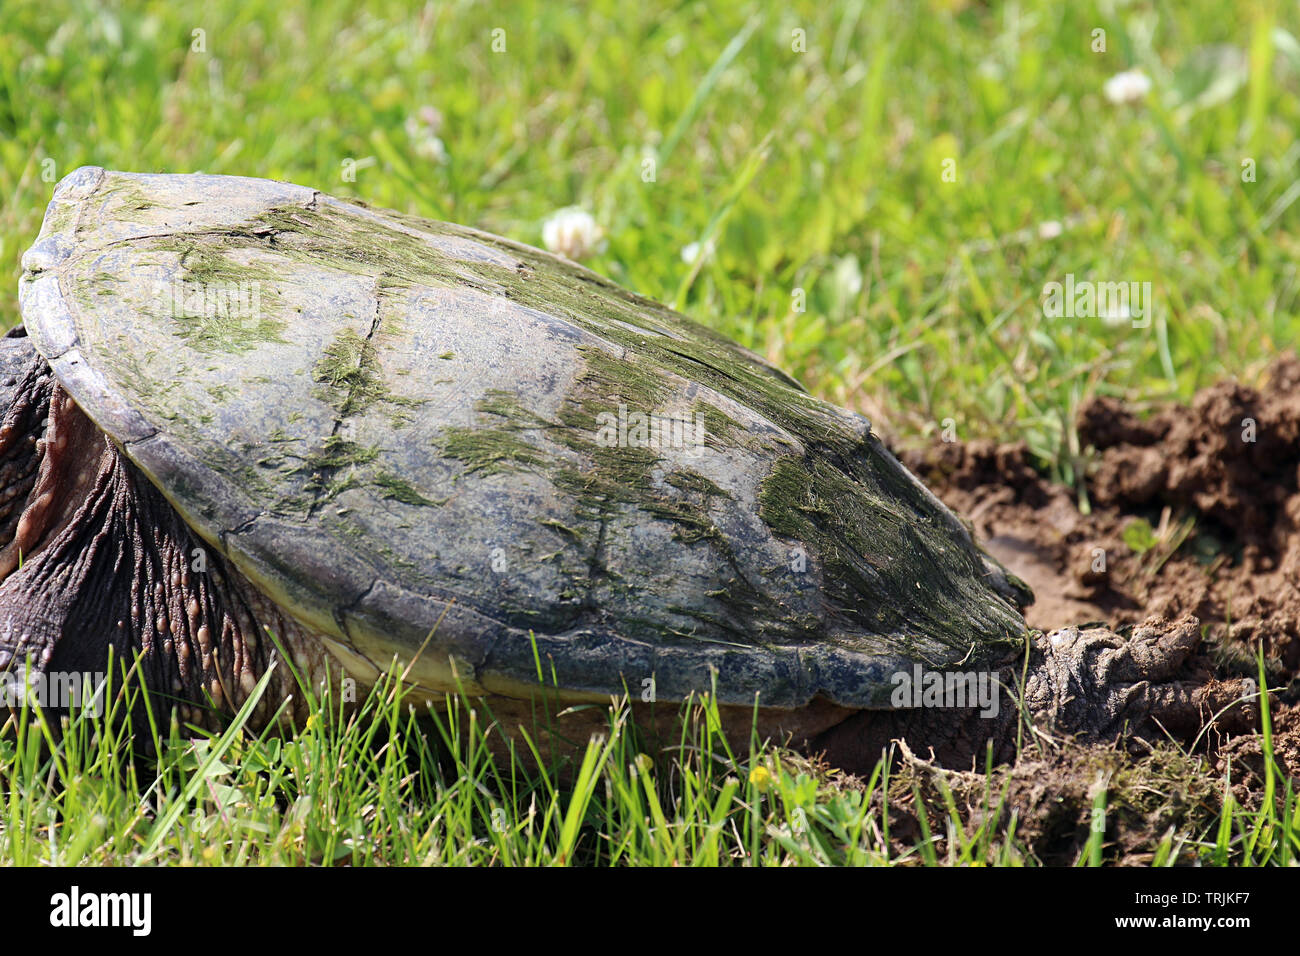 Close up, side view, of a large Common Snapping Turtle laying in the grass in Trevor, Wisconsin, USA, in the spring, laying eggs in a dirt hole Stock Photo